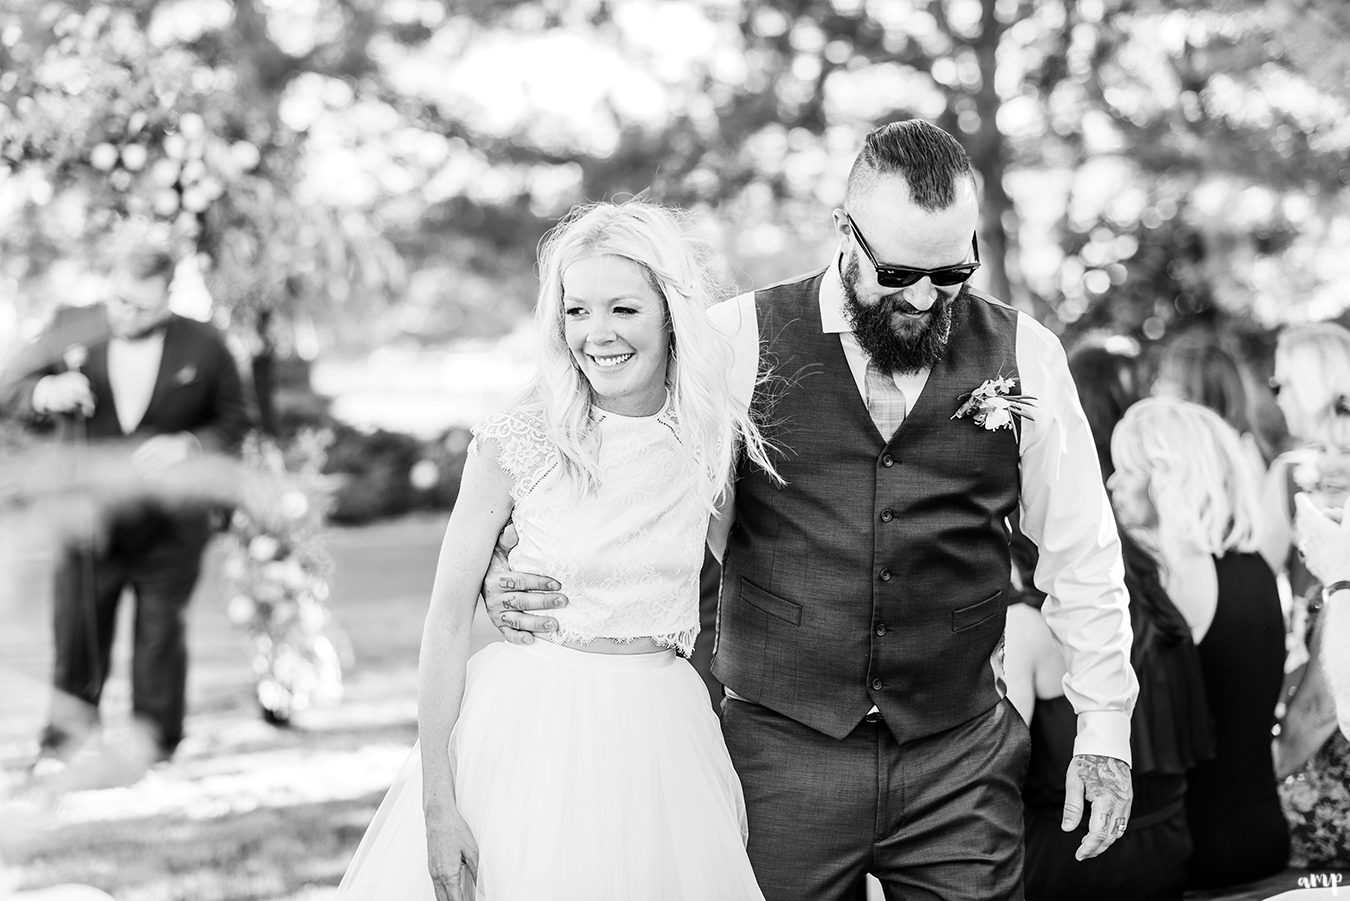 Beth and Dustin walking out of ceremony arm-in-arm | Grand Junction Backyard Wedding | amanda.matilda.photography